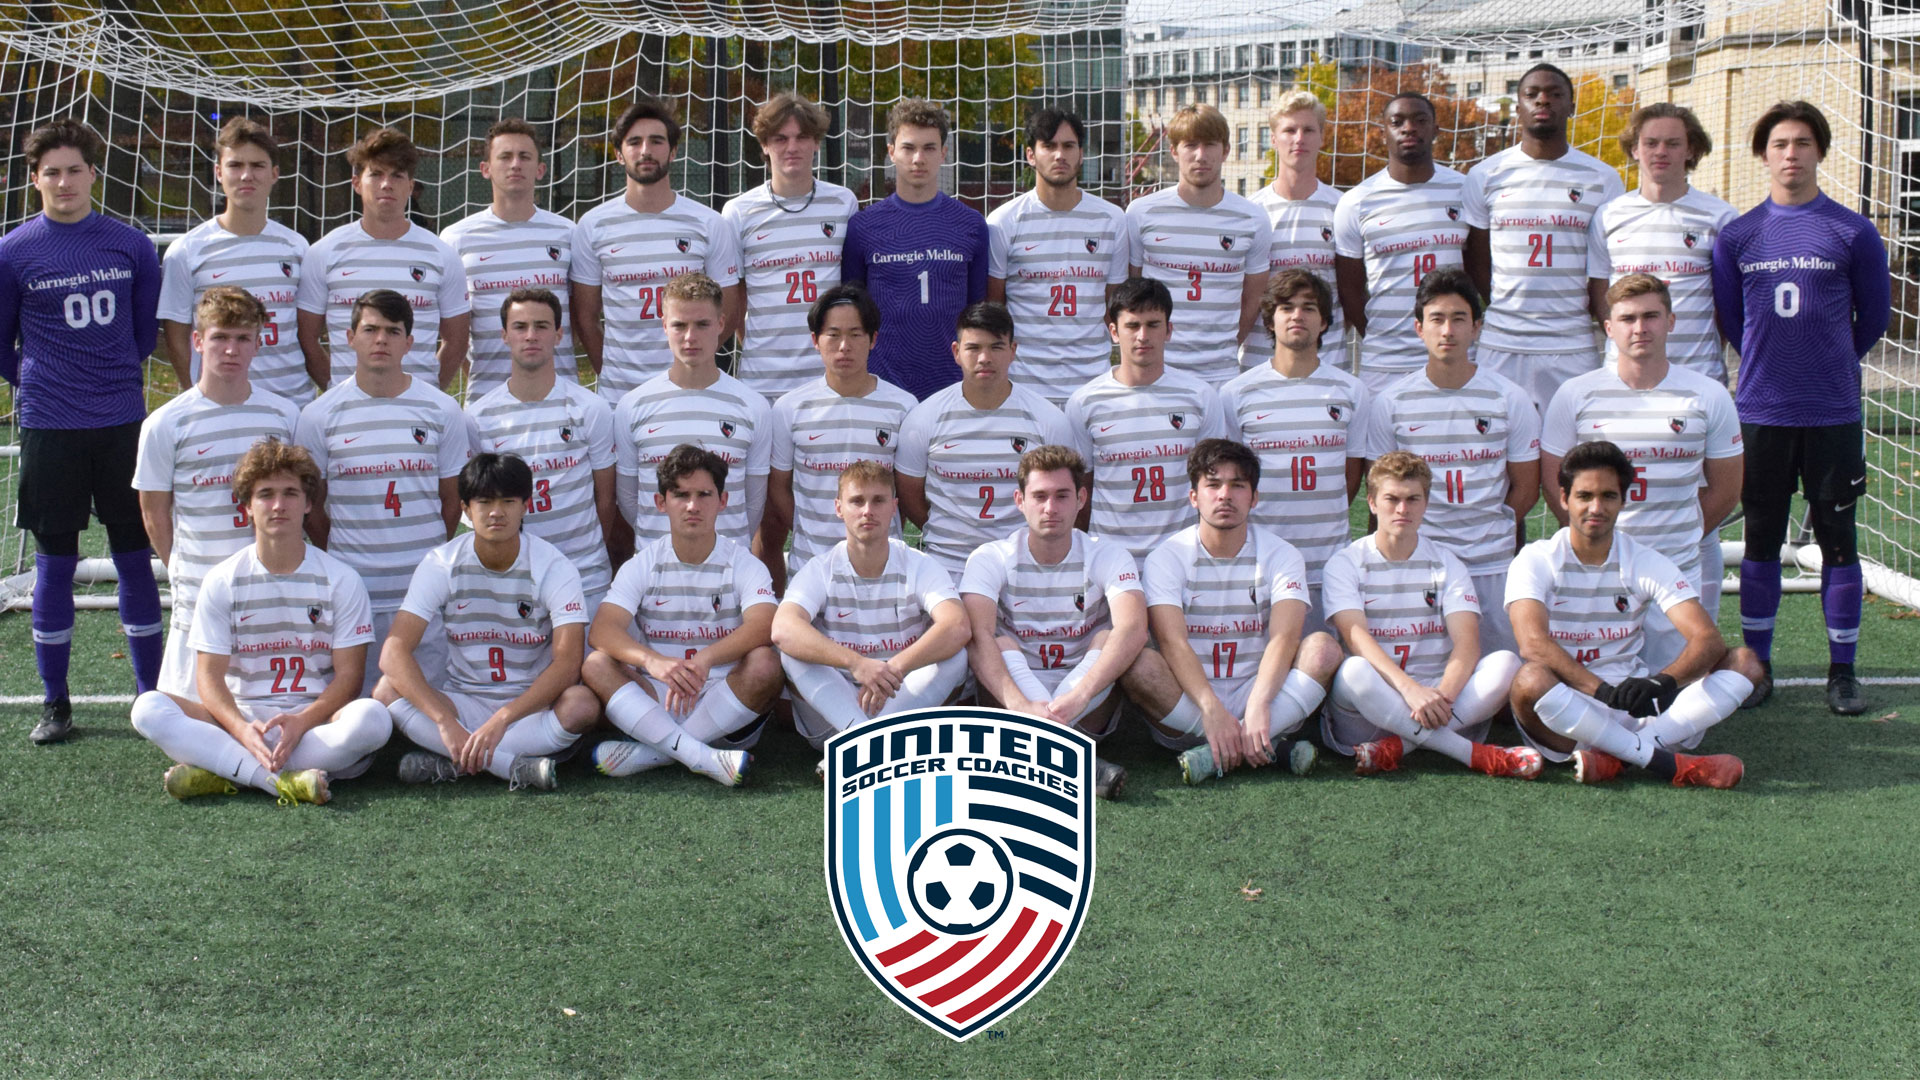 team photo of men's soccer team in three rows with United Soccer Coaches Logo